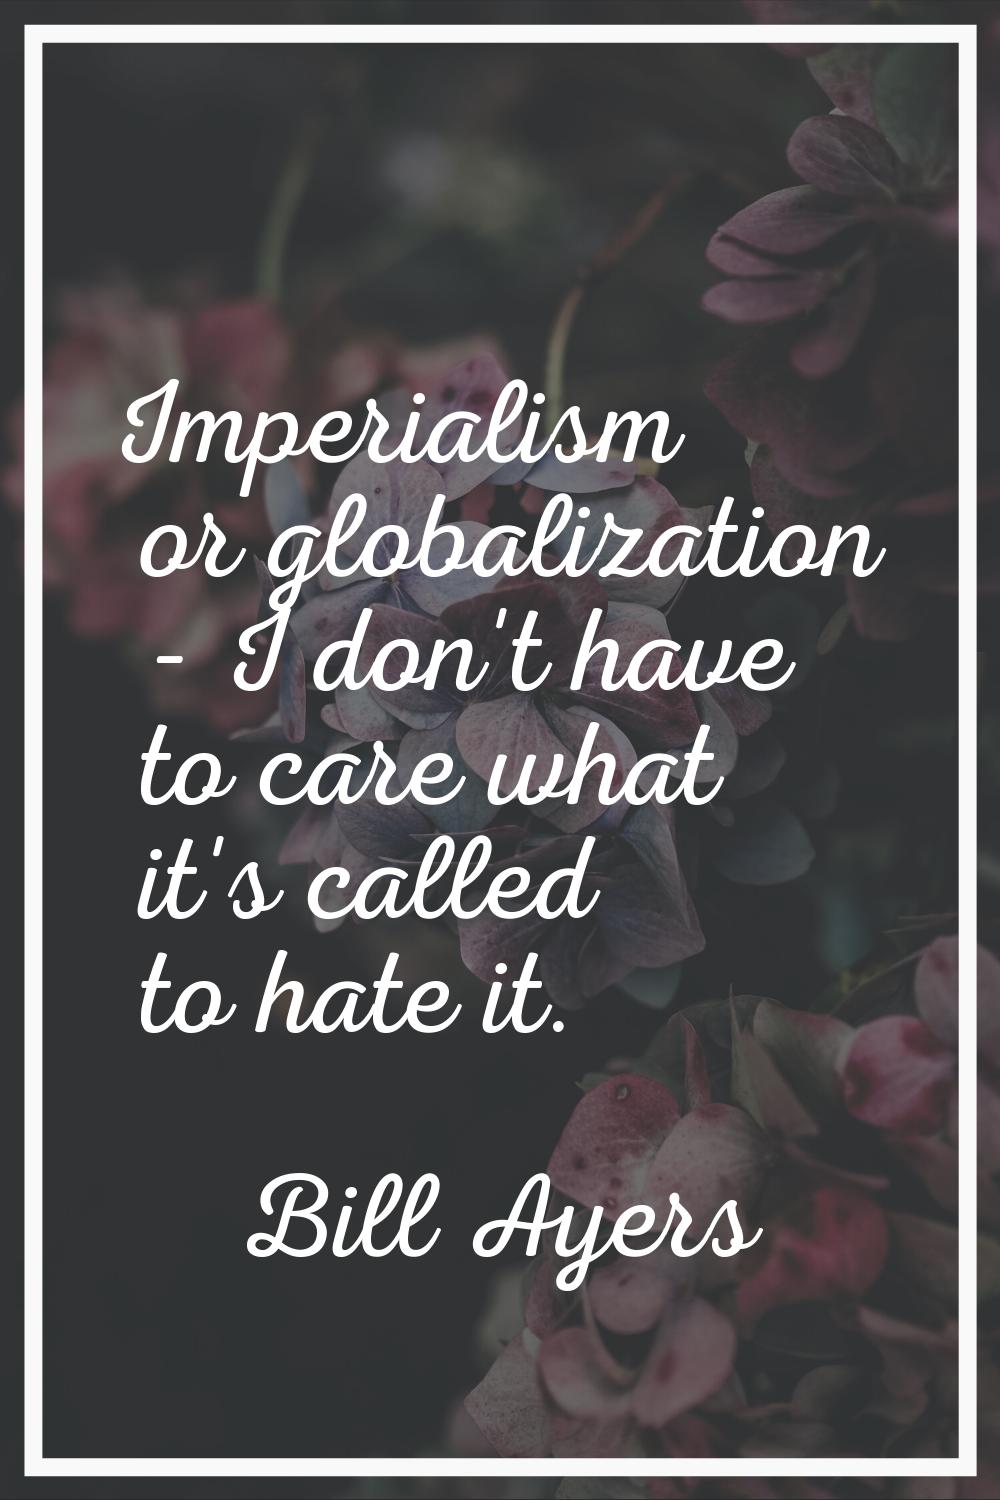 Imperialism or globalization - I don't have to care what it's called to hate it.